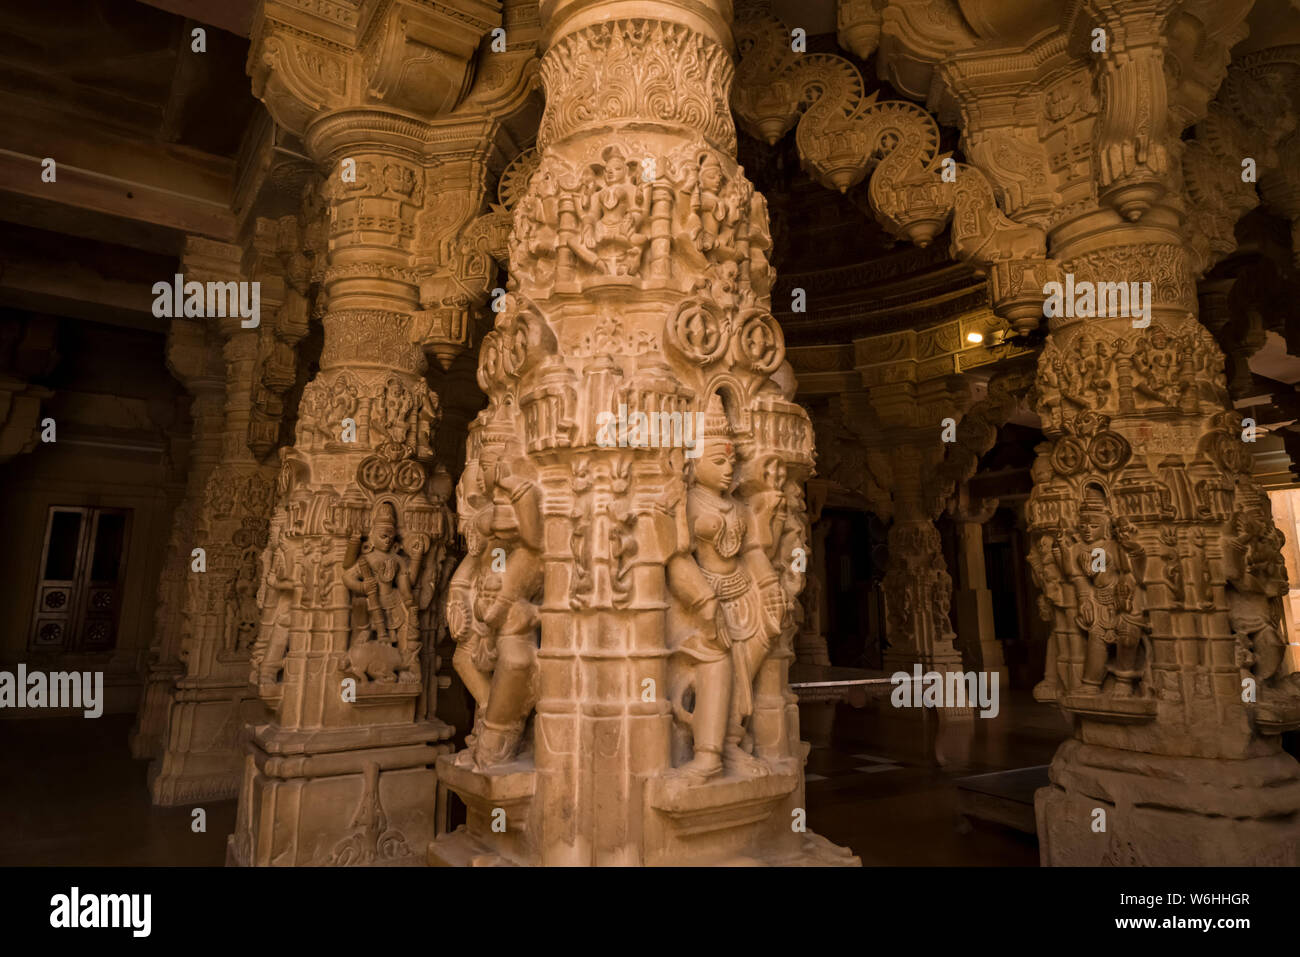 Ornate carvings in a Temple in Jaisalmer Fort; Jaisalmer, Rajasthan, India Stock Photo